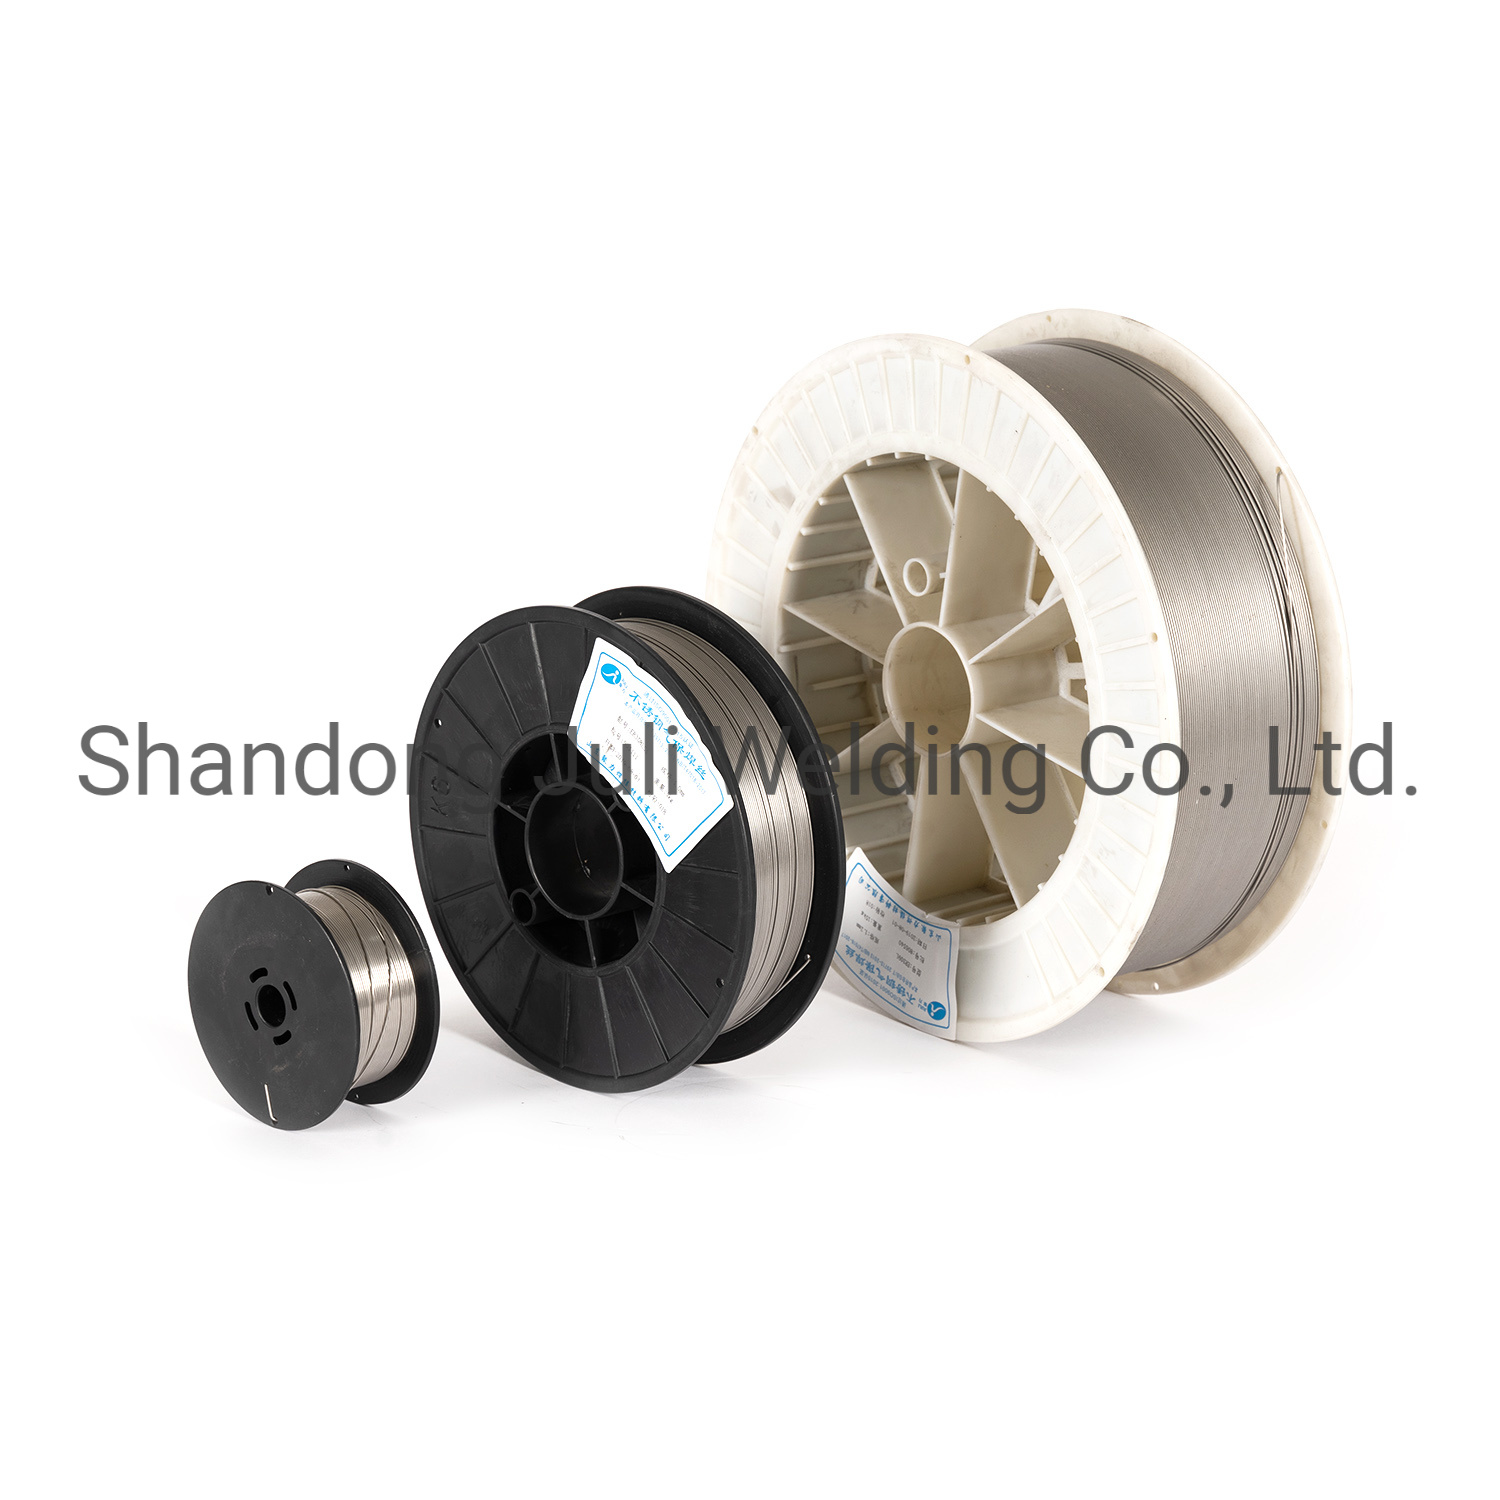 Er309L Stainless Steel Welding Wire